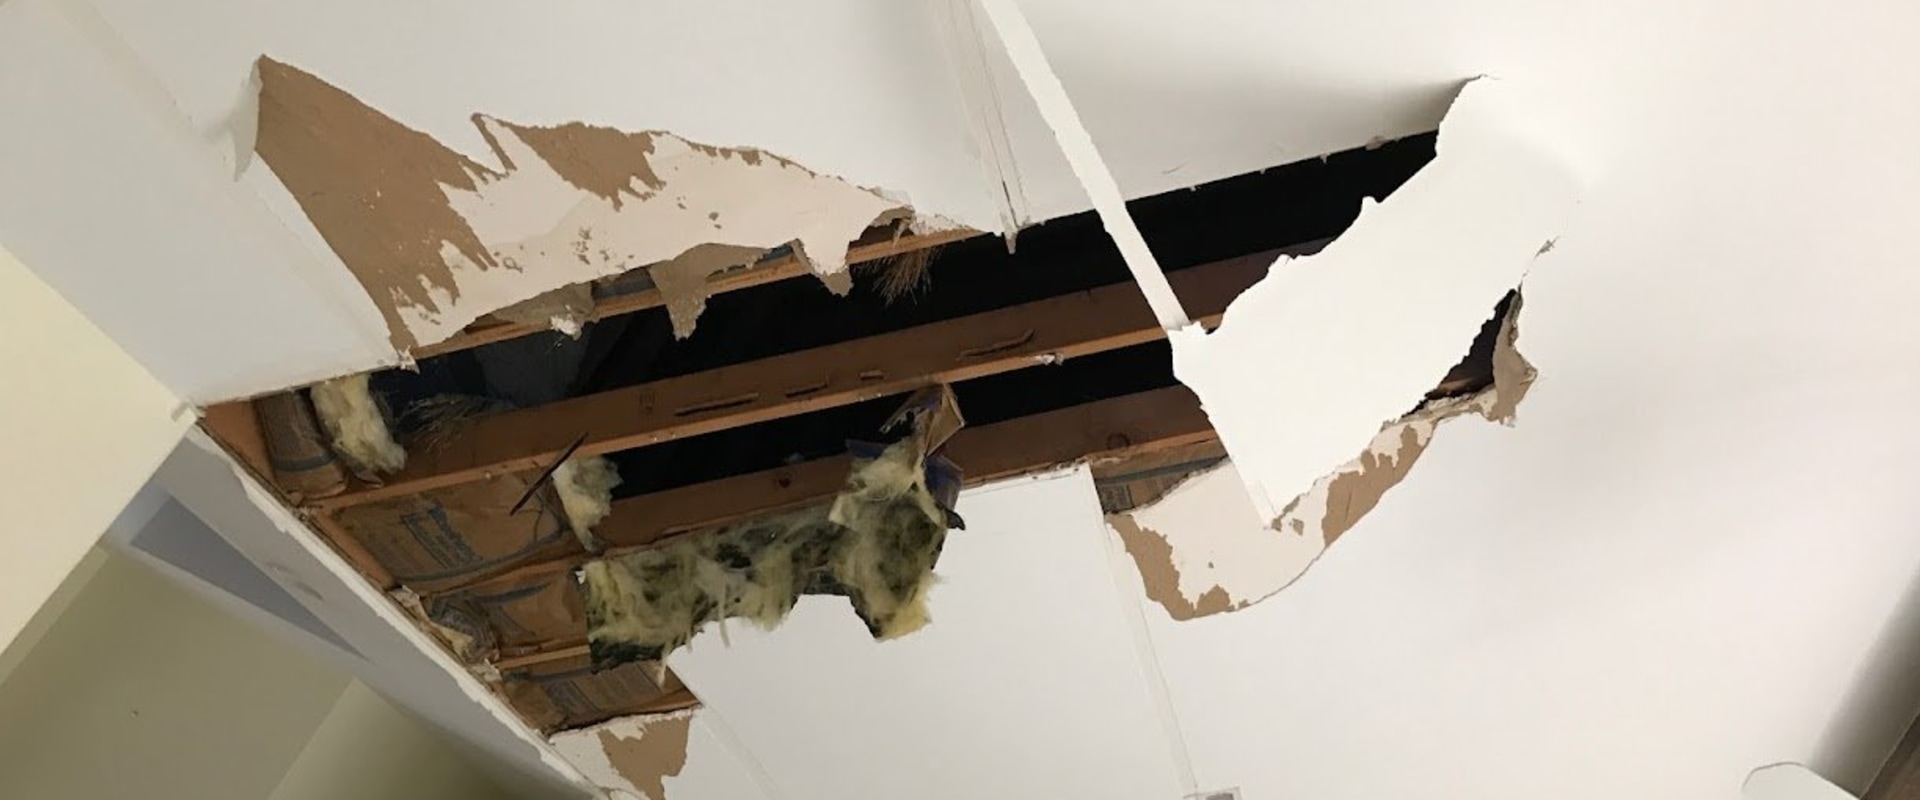 How long does a leak take to show on ceiling?